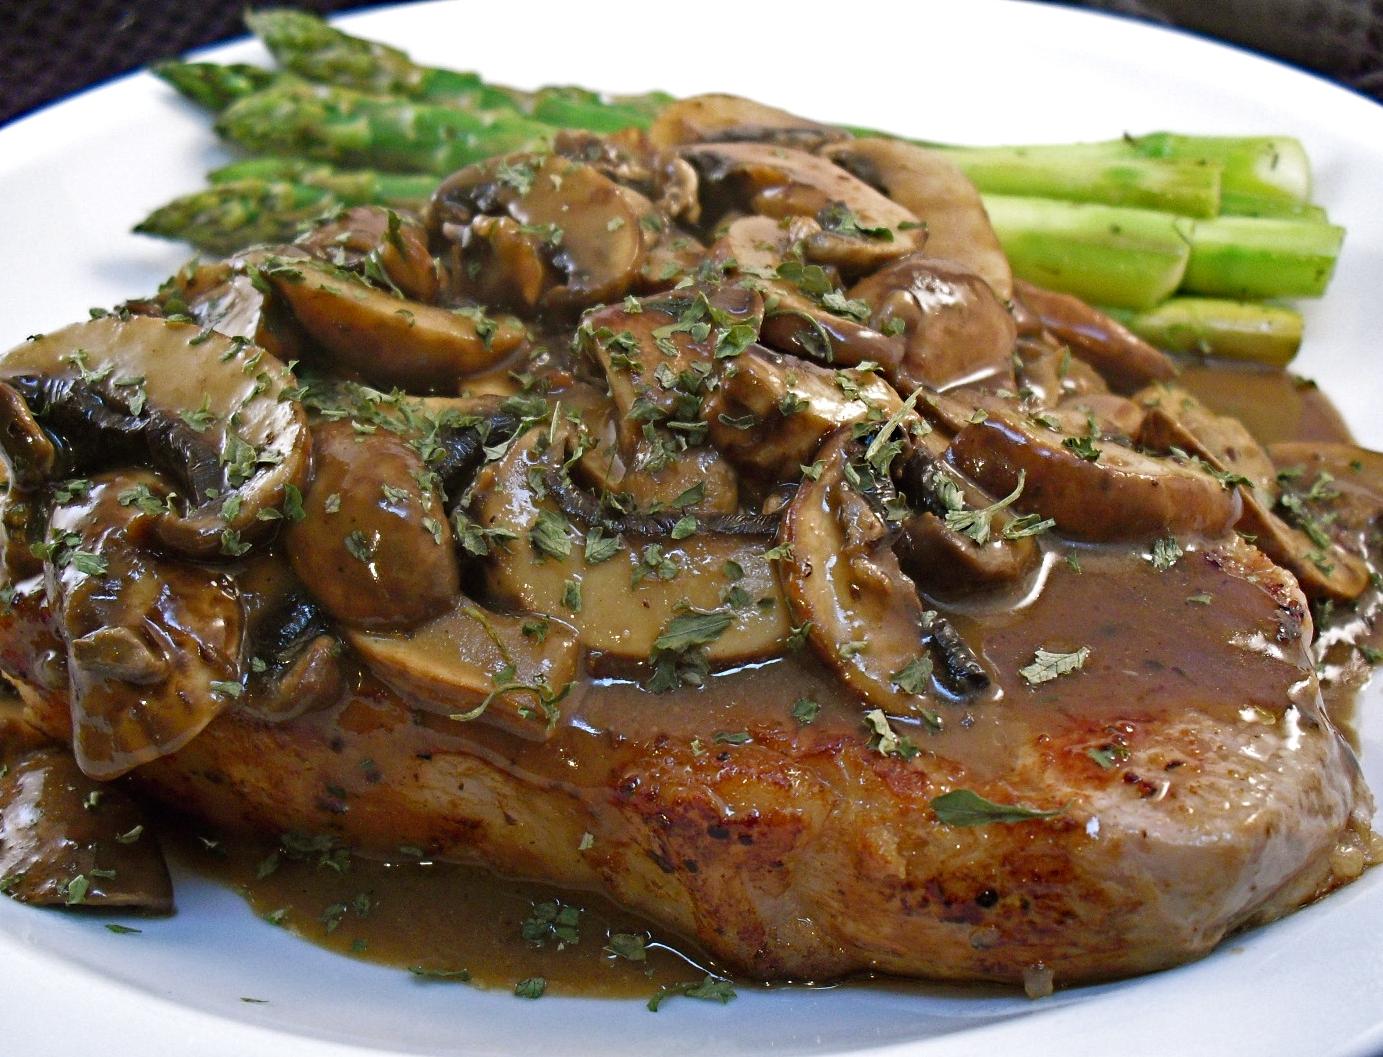  Sink into a juicy veal chop with a merlot glaze that will make your taste buds sing!